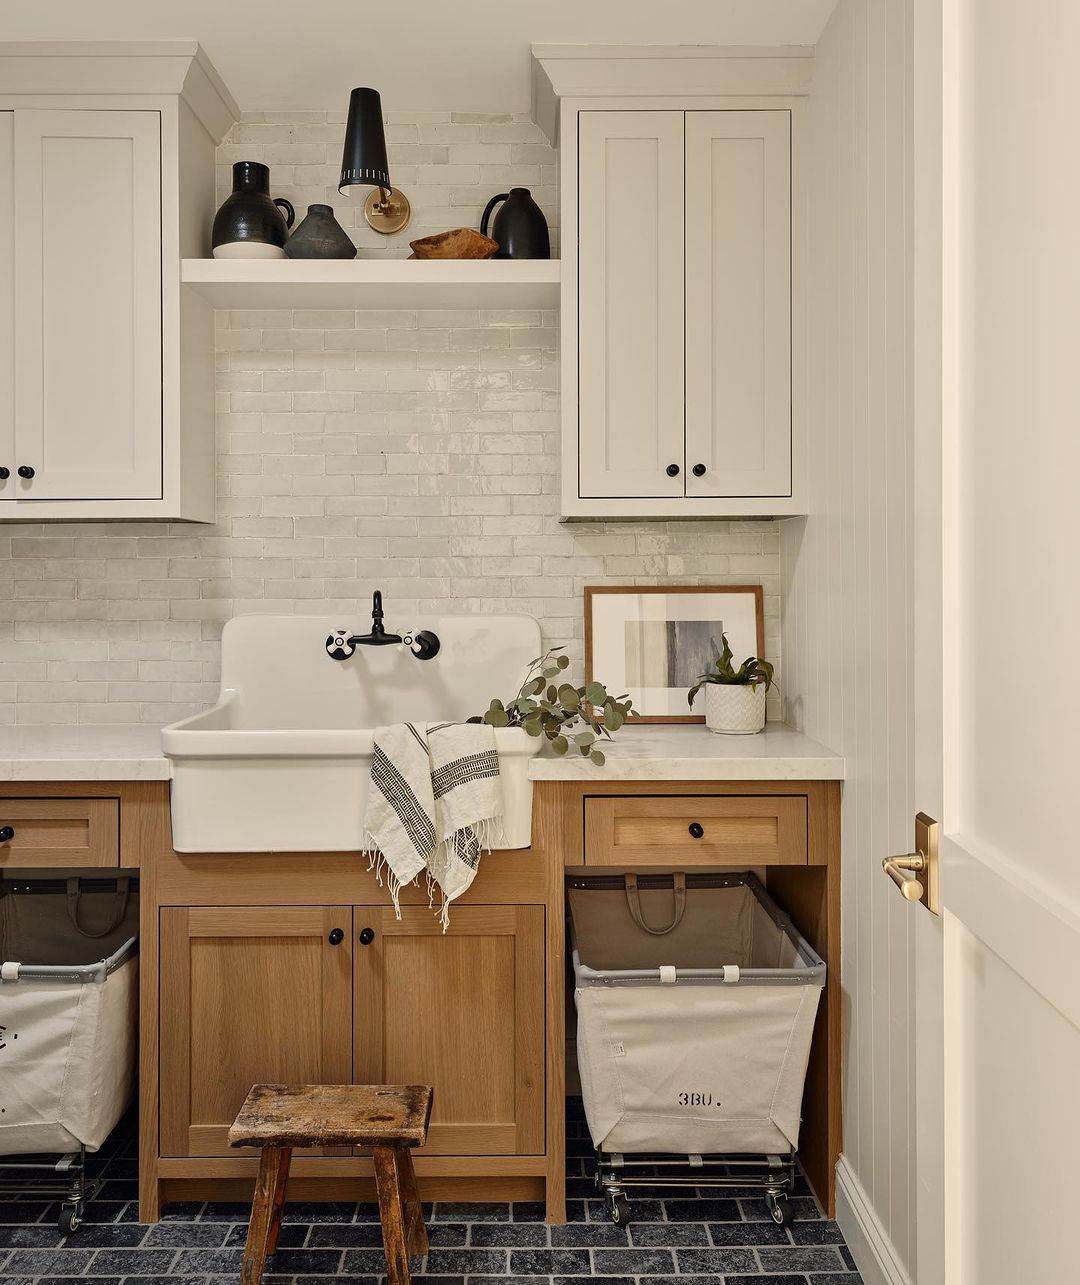 Laundry Room: How to Choose a Laundry Sink That Matches Your Decor